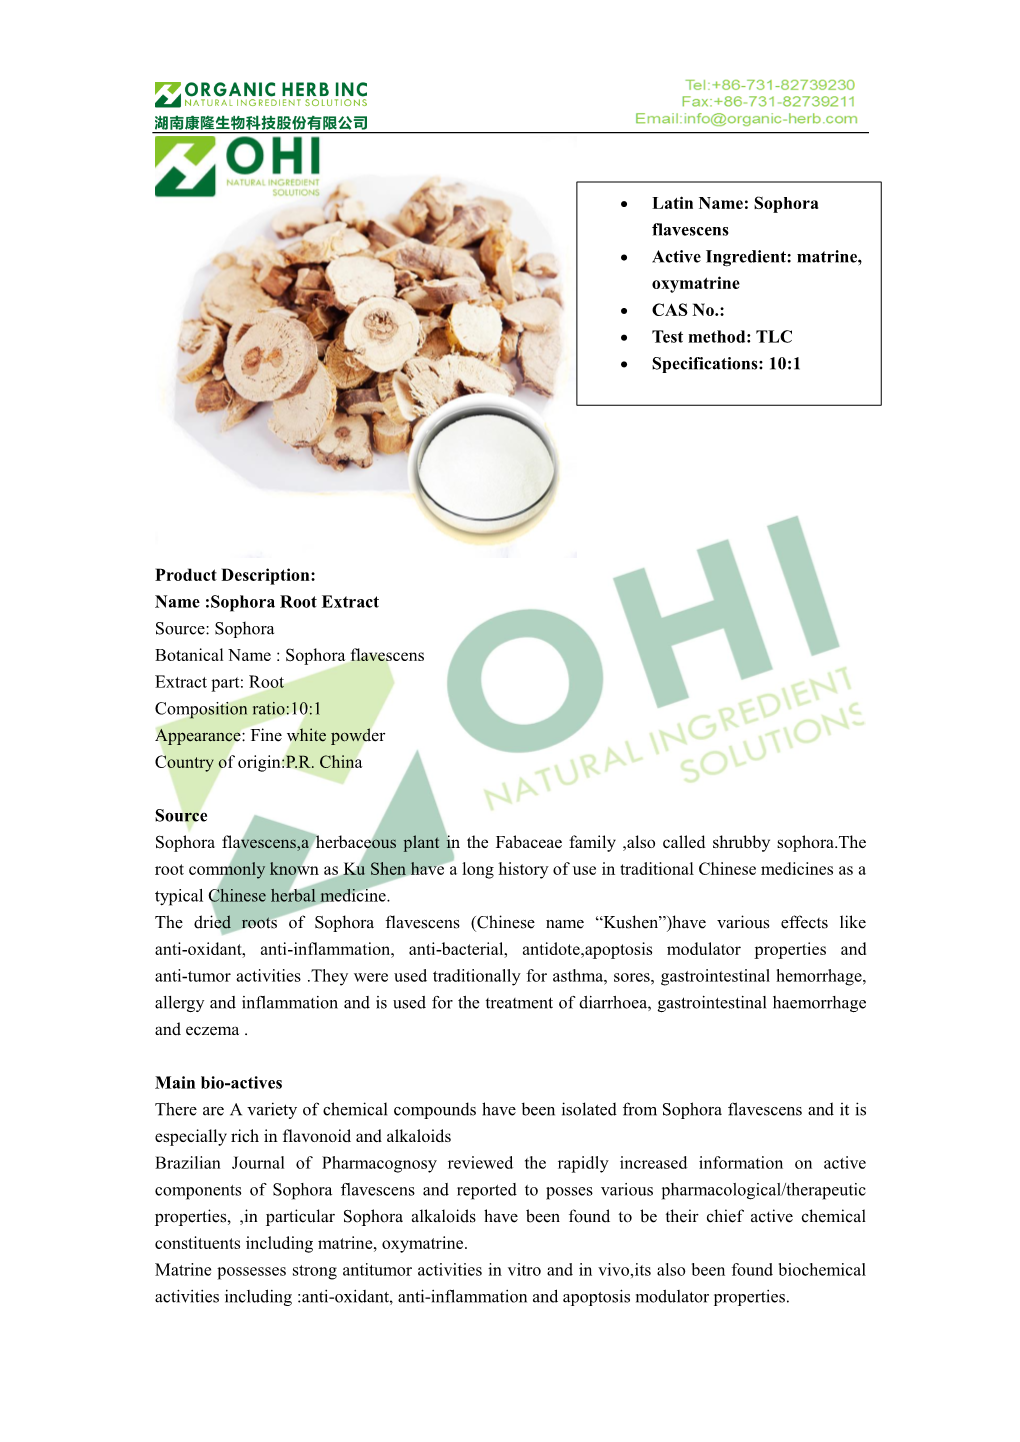 Sophora Flavescens Extract Part: Root Composition Ratio:10:1 Appearance: Fine White Powder Country of Origin:P.R